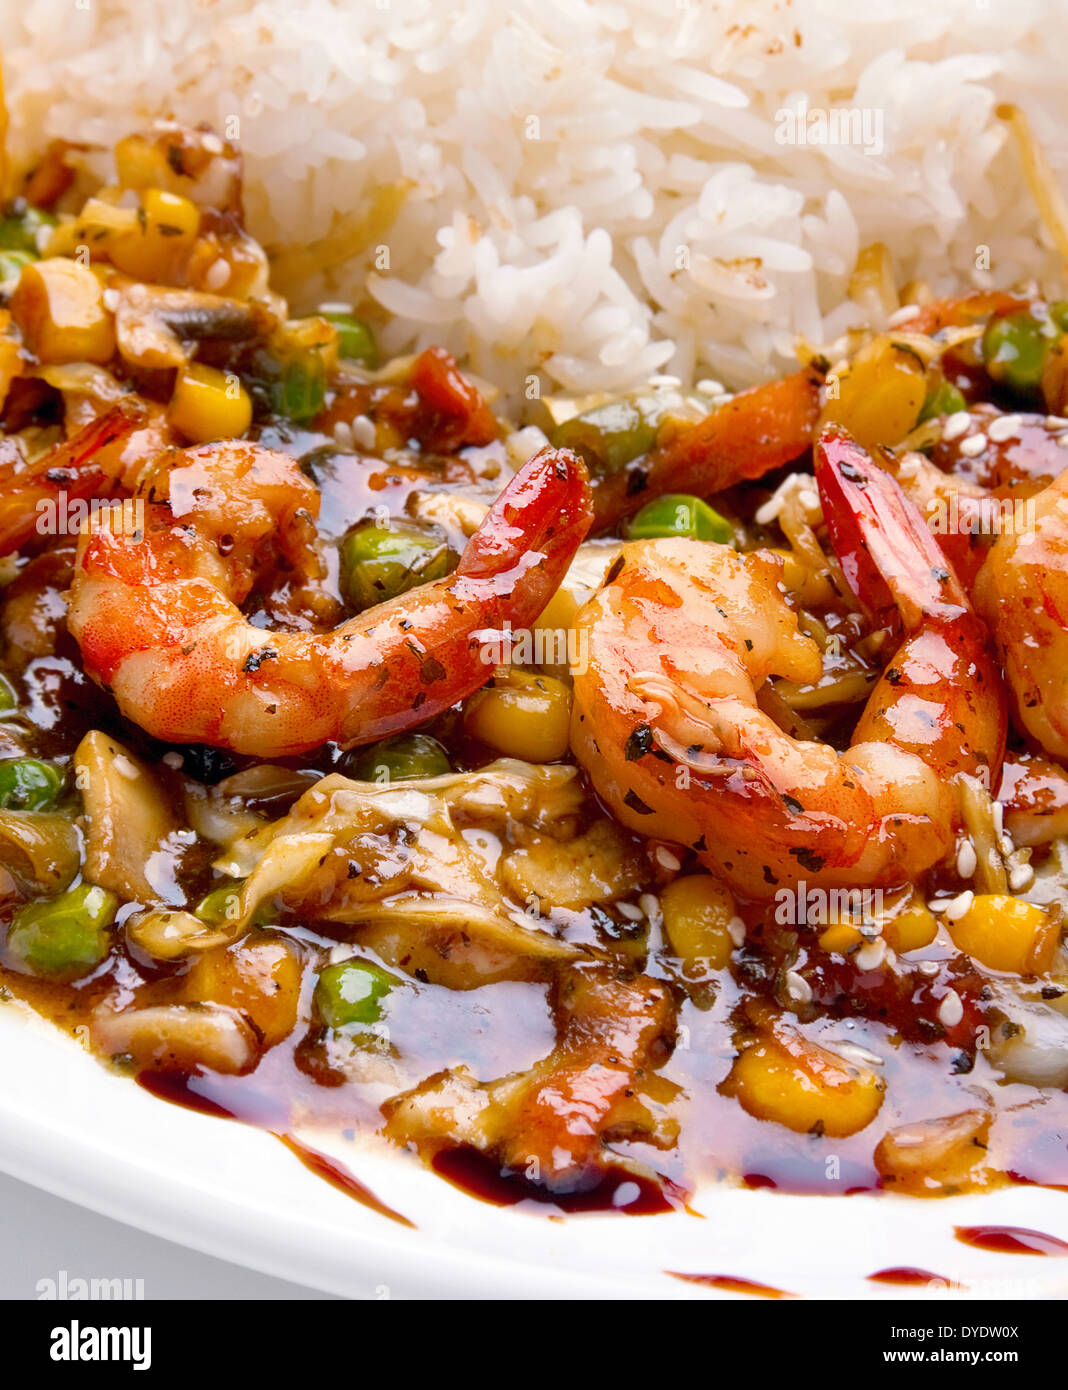 Fried shrimp with vegeable peasand corn Stock Photo